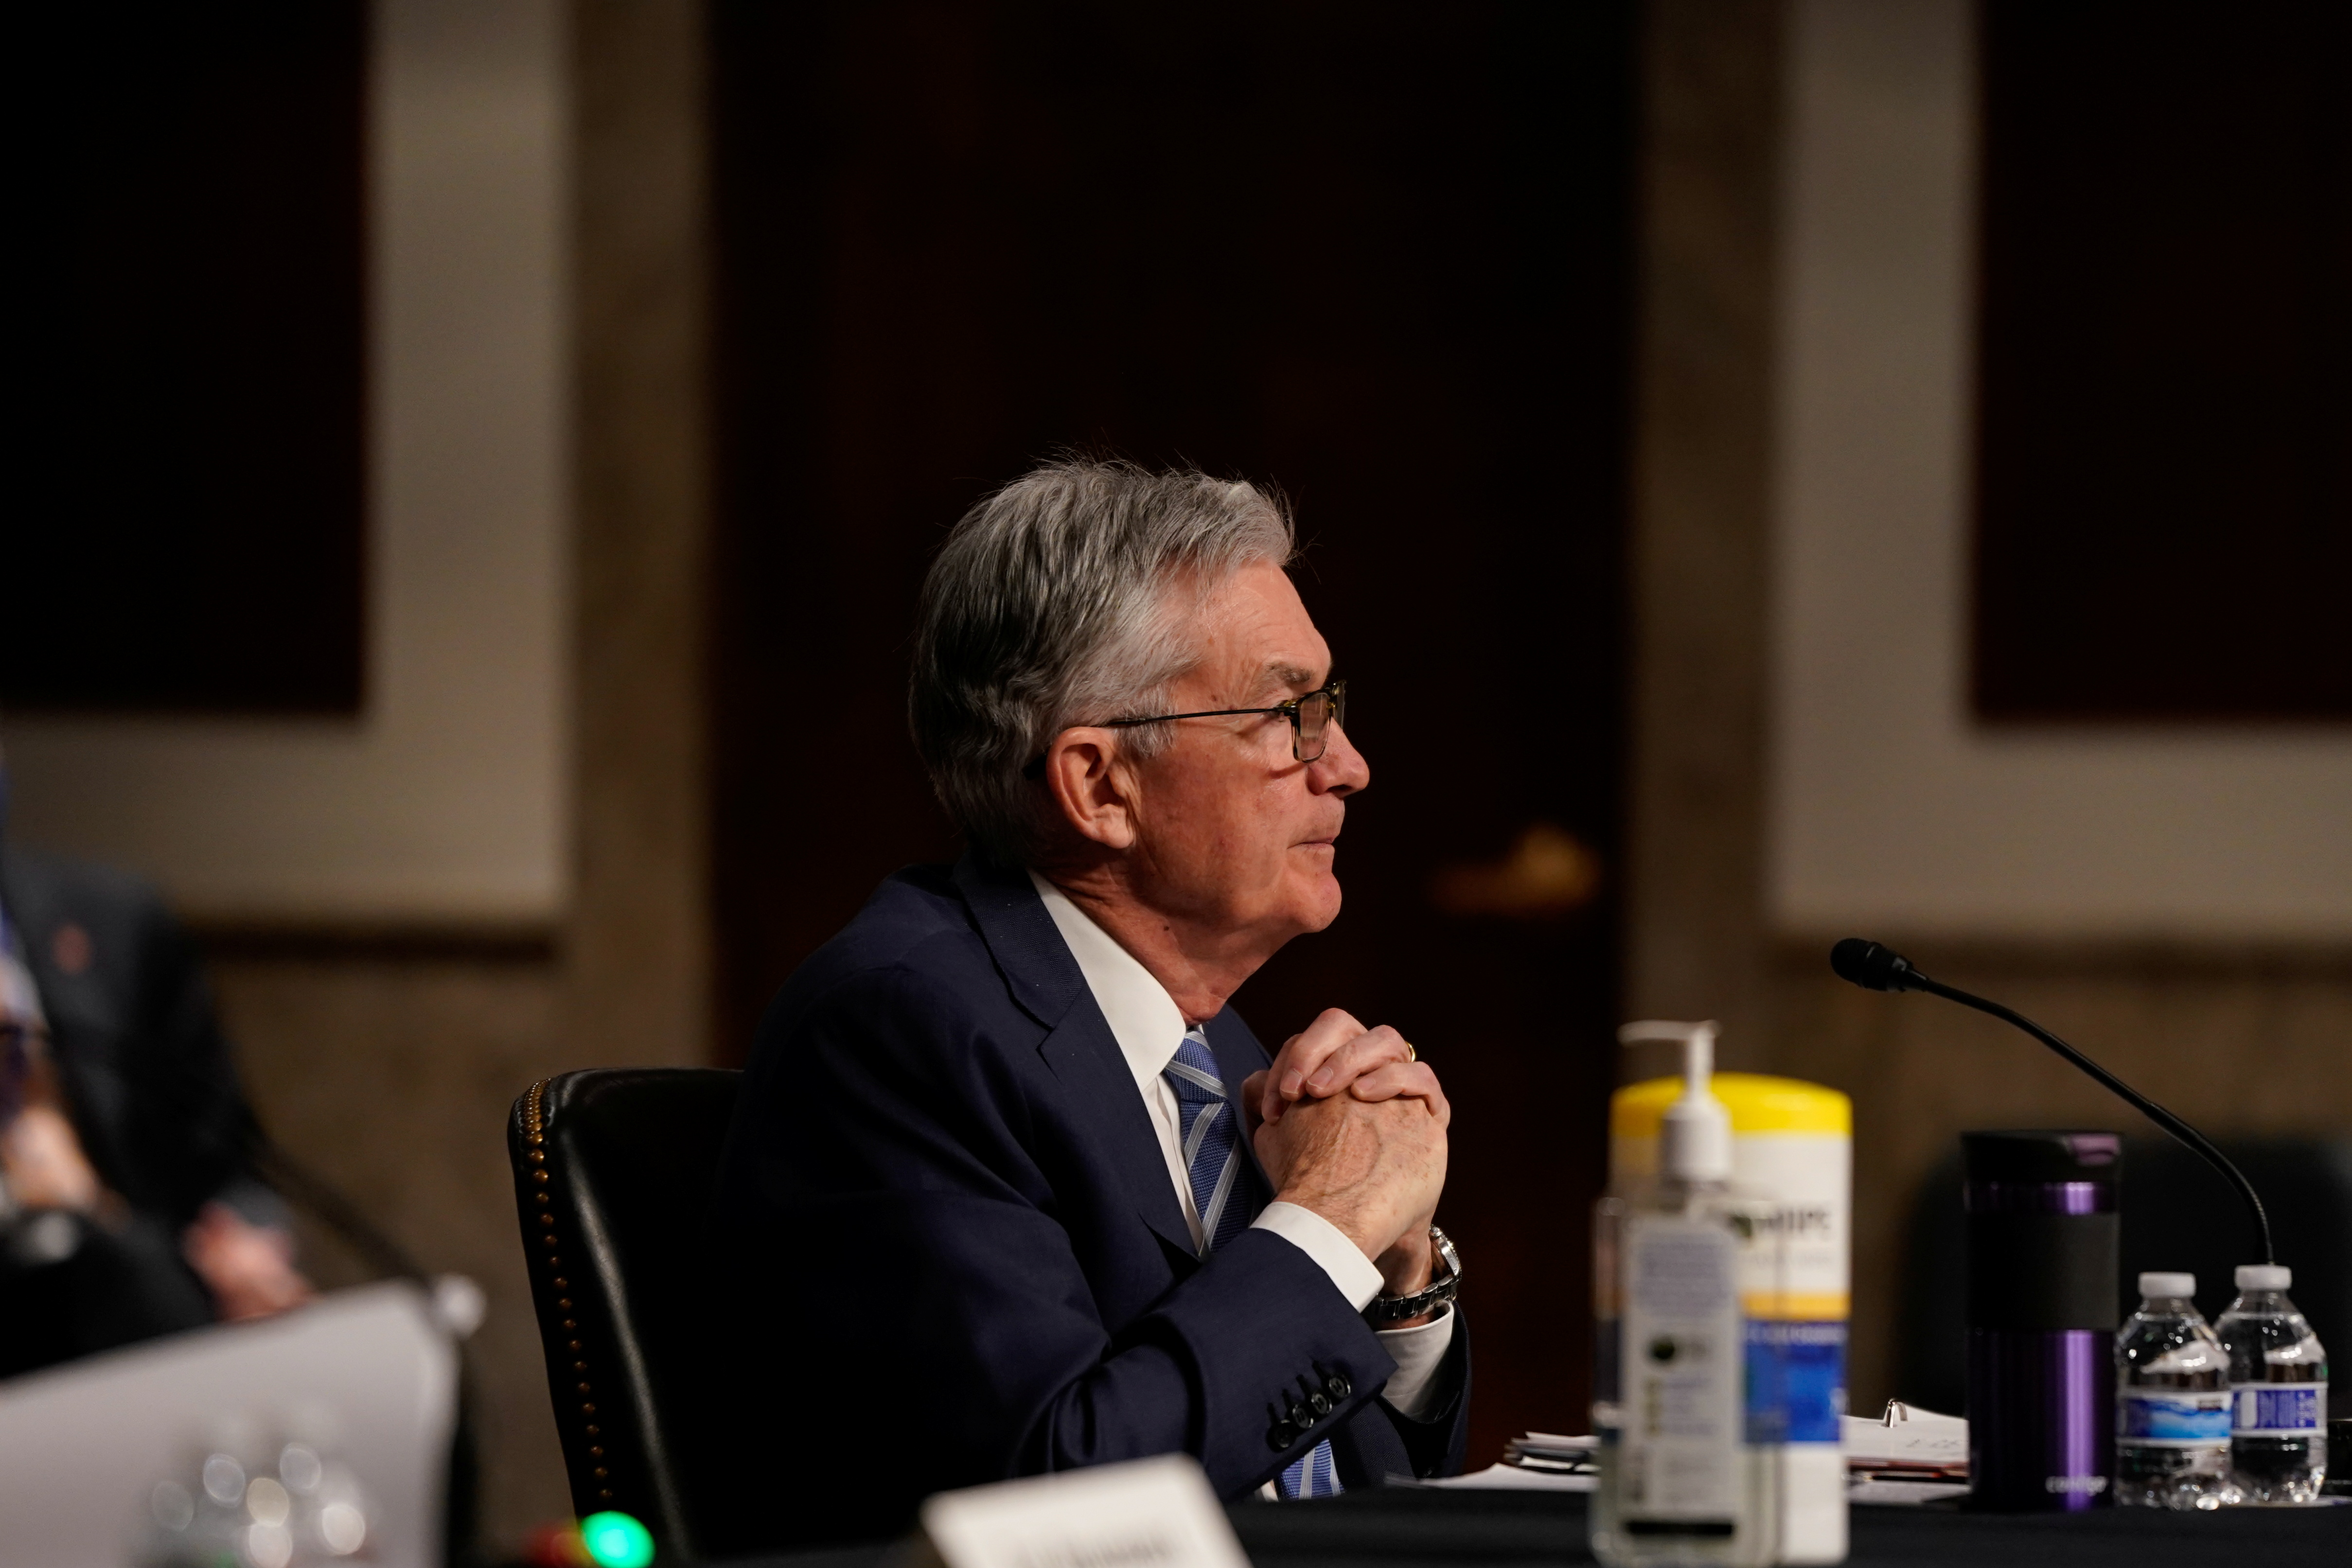 Federal Reserve Chair Jerome Powell pauses while testifying before a Senate Banking Committee hybrid hearing on oversight of the Treasury Department and the Federal Reserve on Capitol Hill in Washington, U.S., November 30, 2021. REUTERS/Elizabeth Frantz